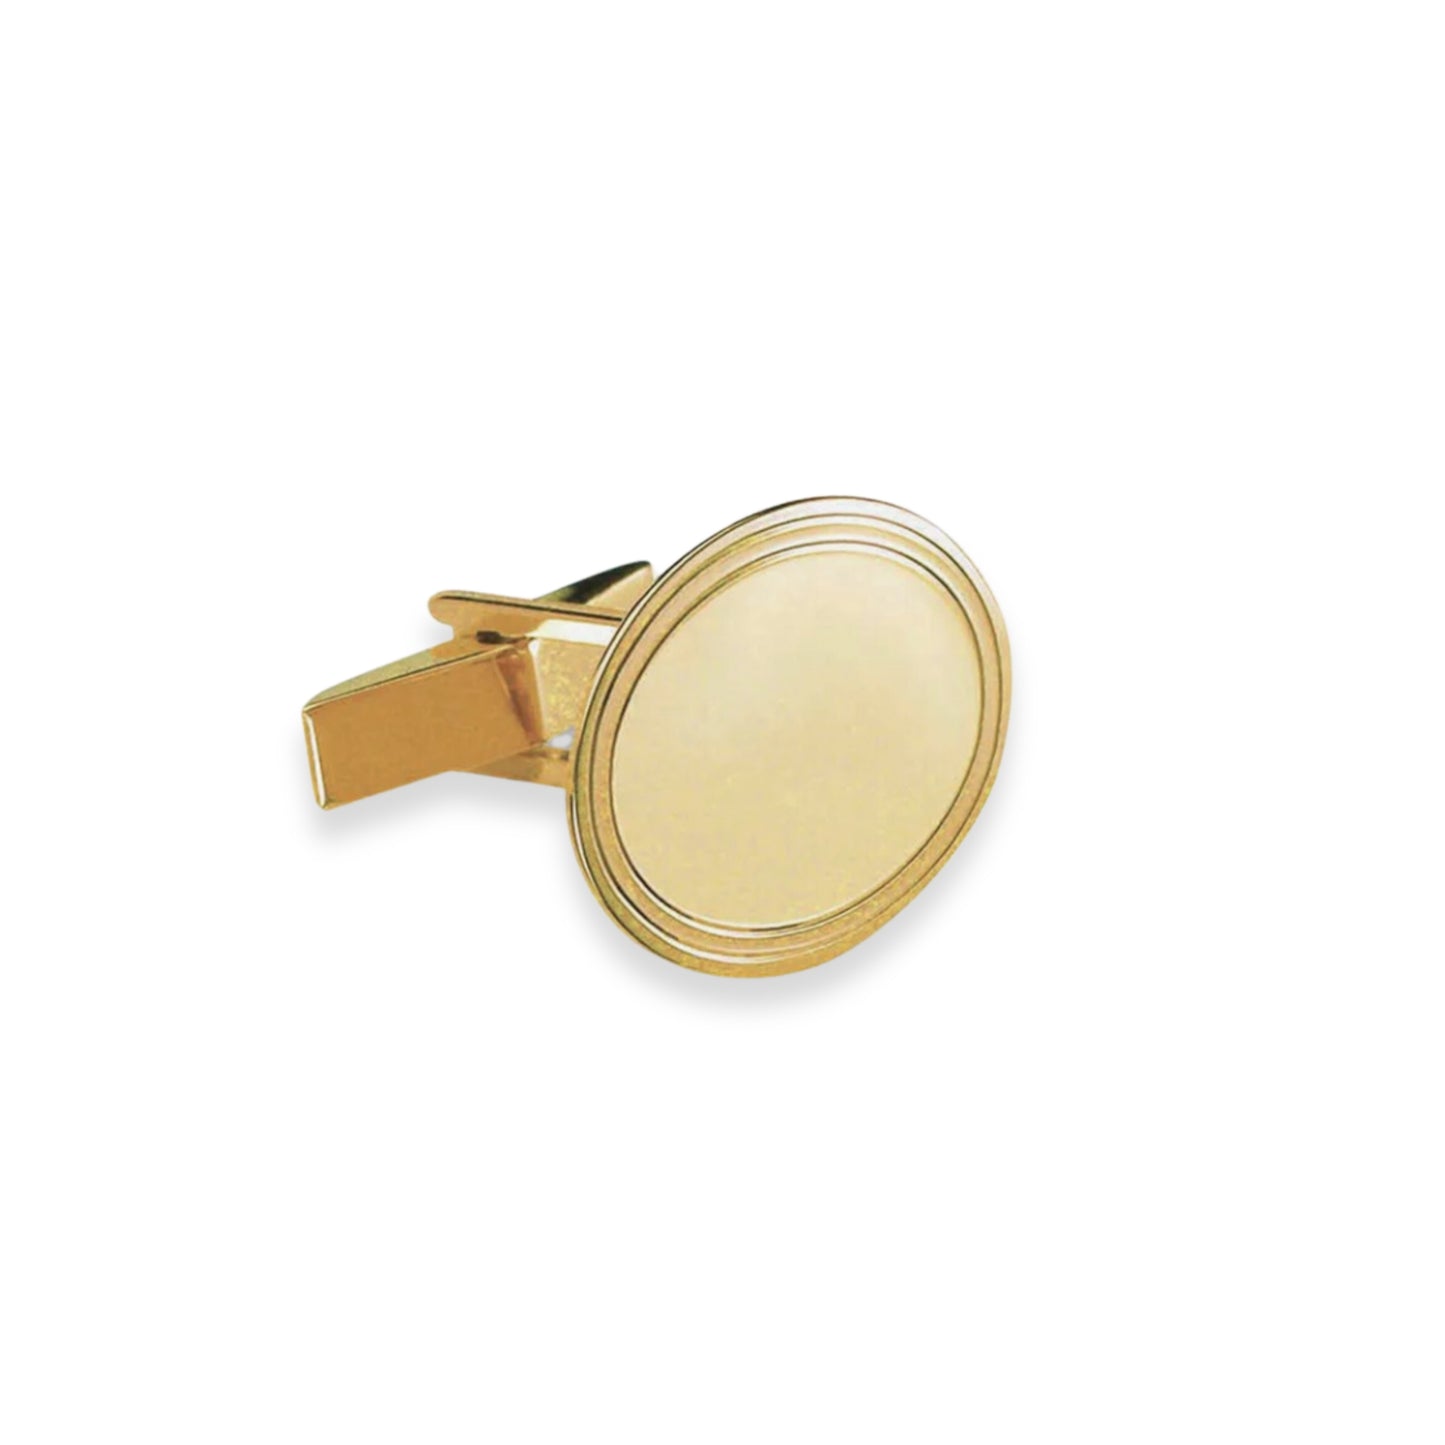 14K Gold Oval Cufflinks with Engine Turned Edge